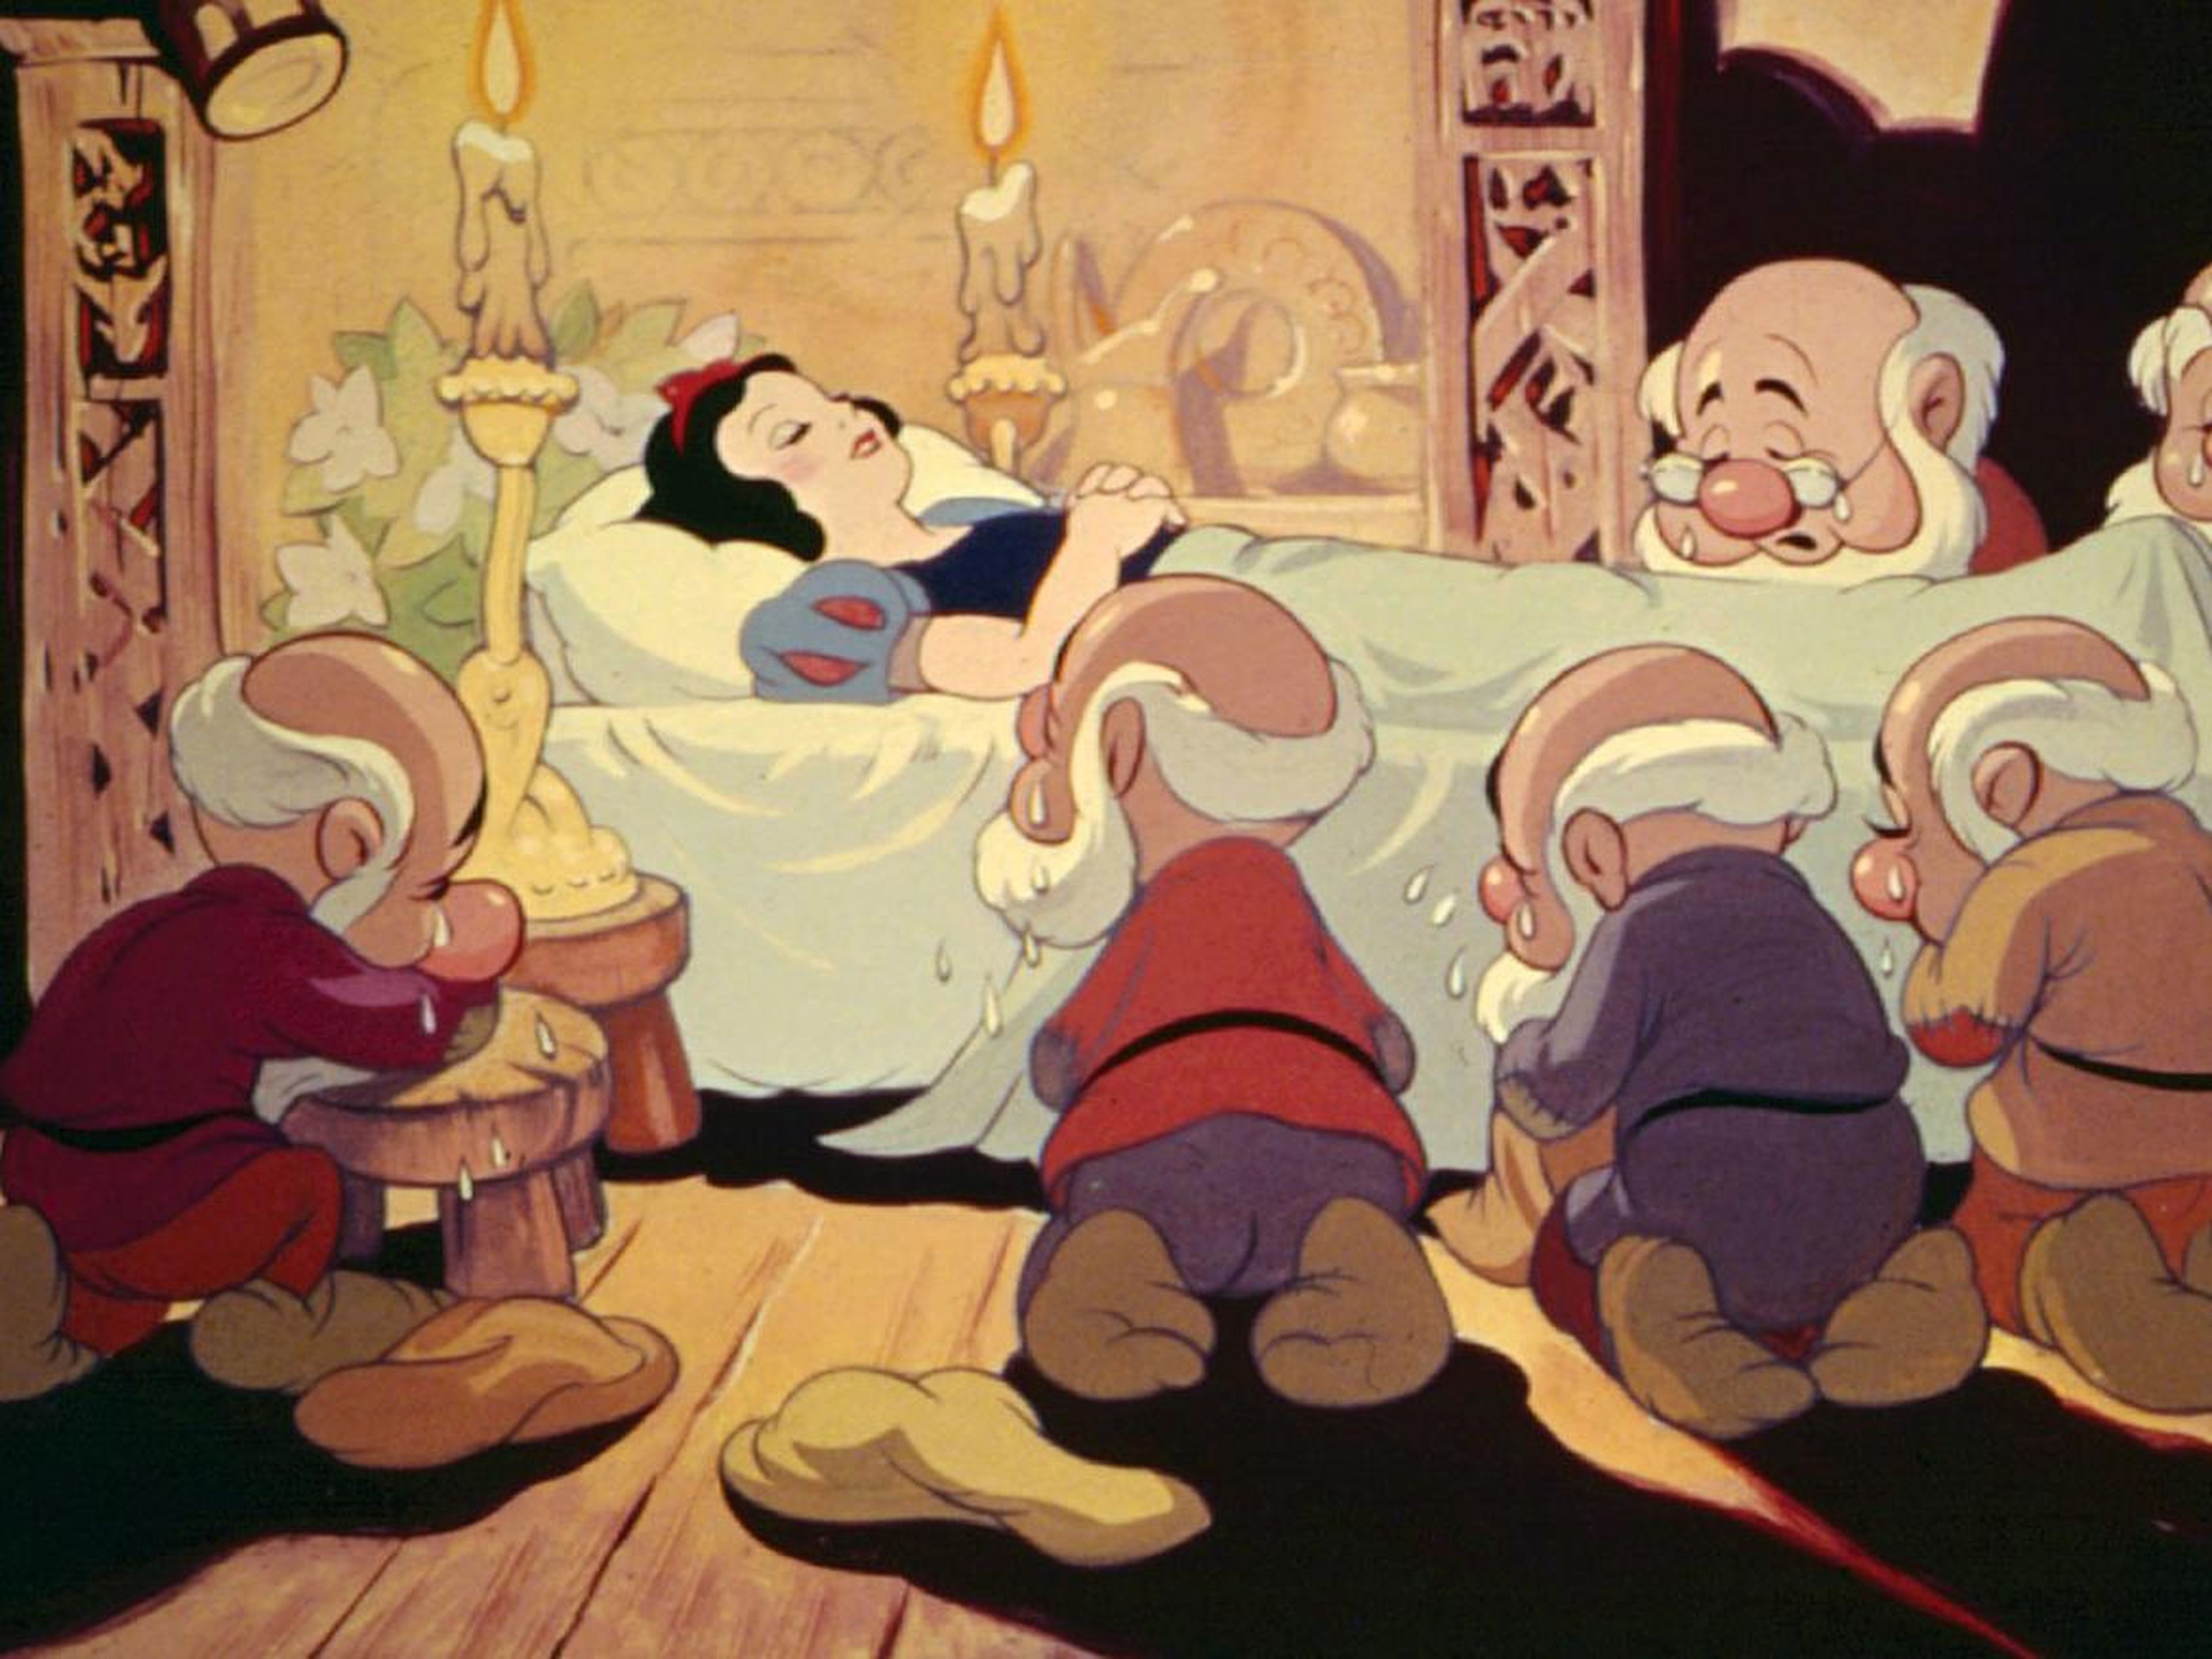 A scene from "Snow White and the Seven Dwarfs."